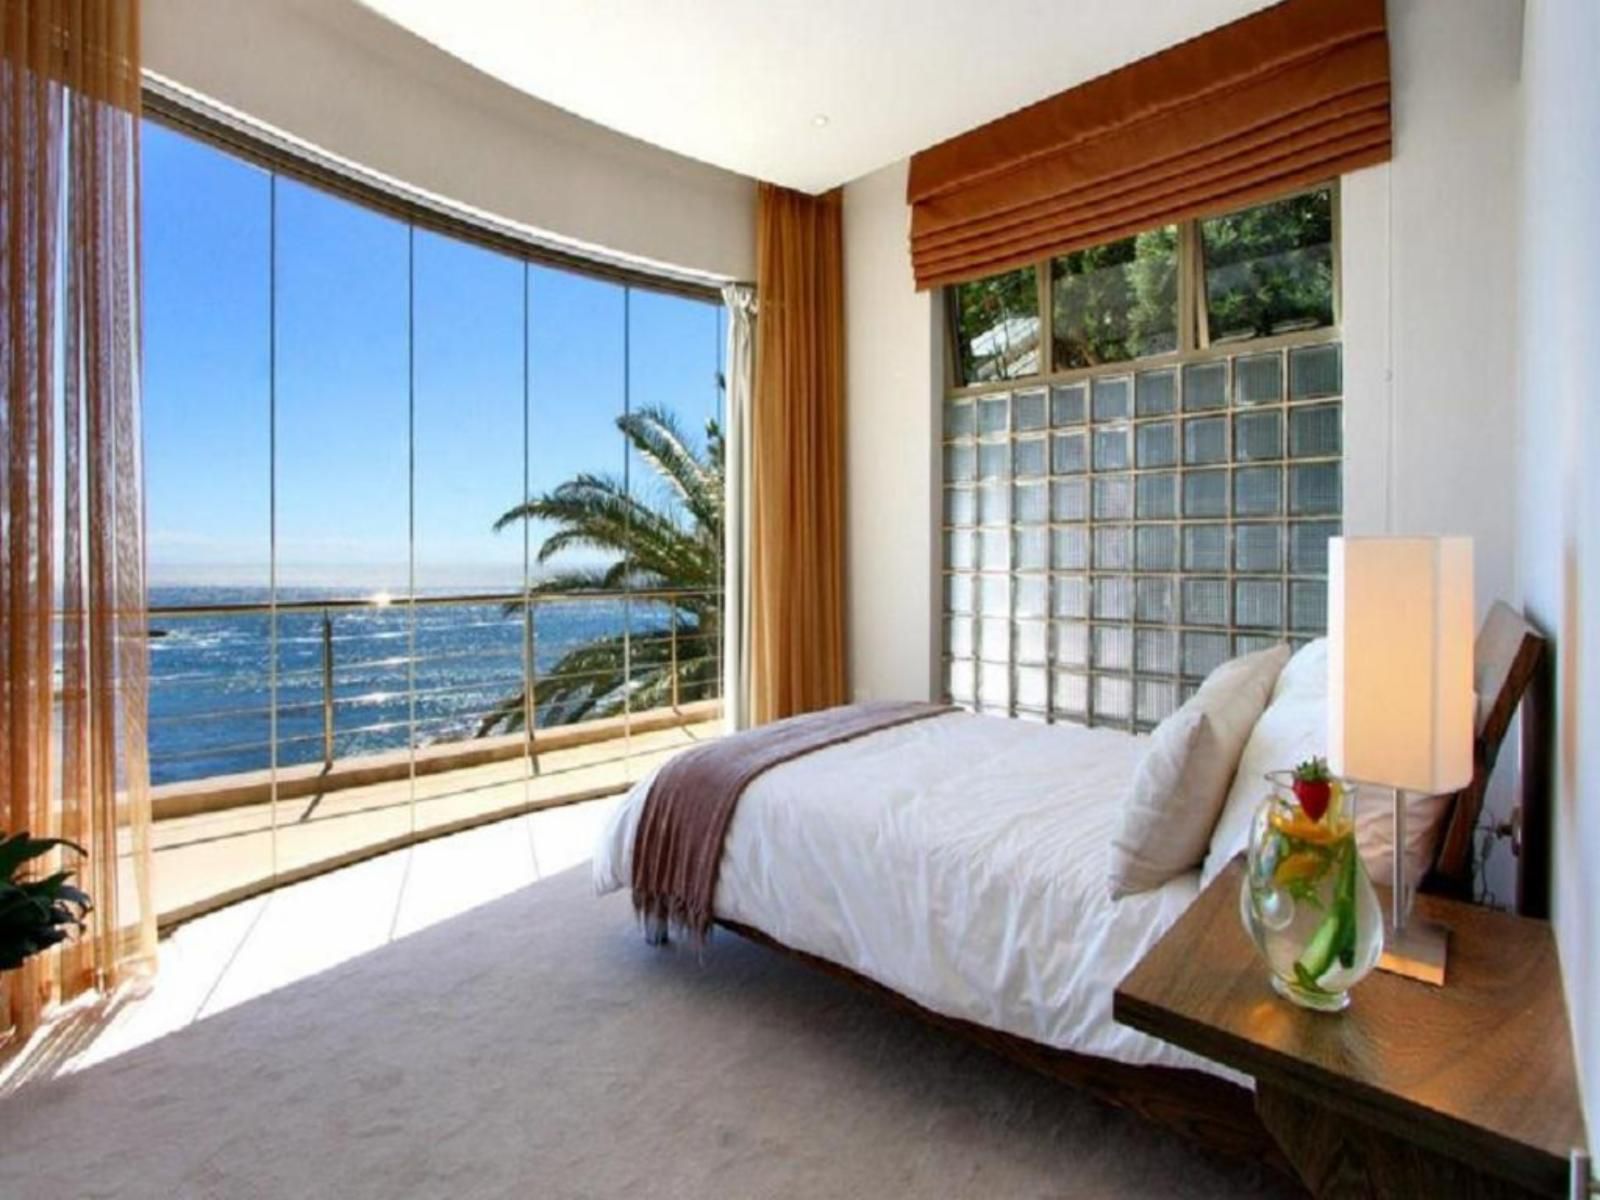 Villa Dolce Vita Camps Bay Cape Town Western Cape South Africa Bedroom